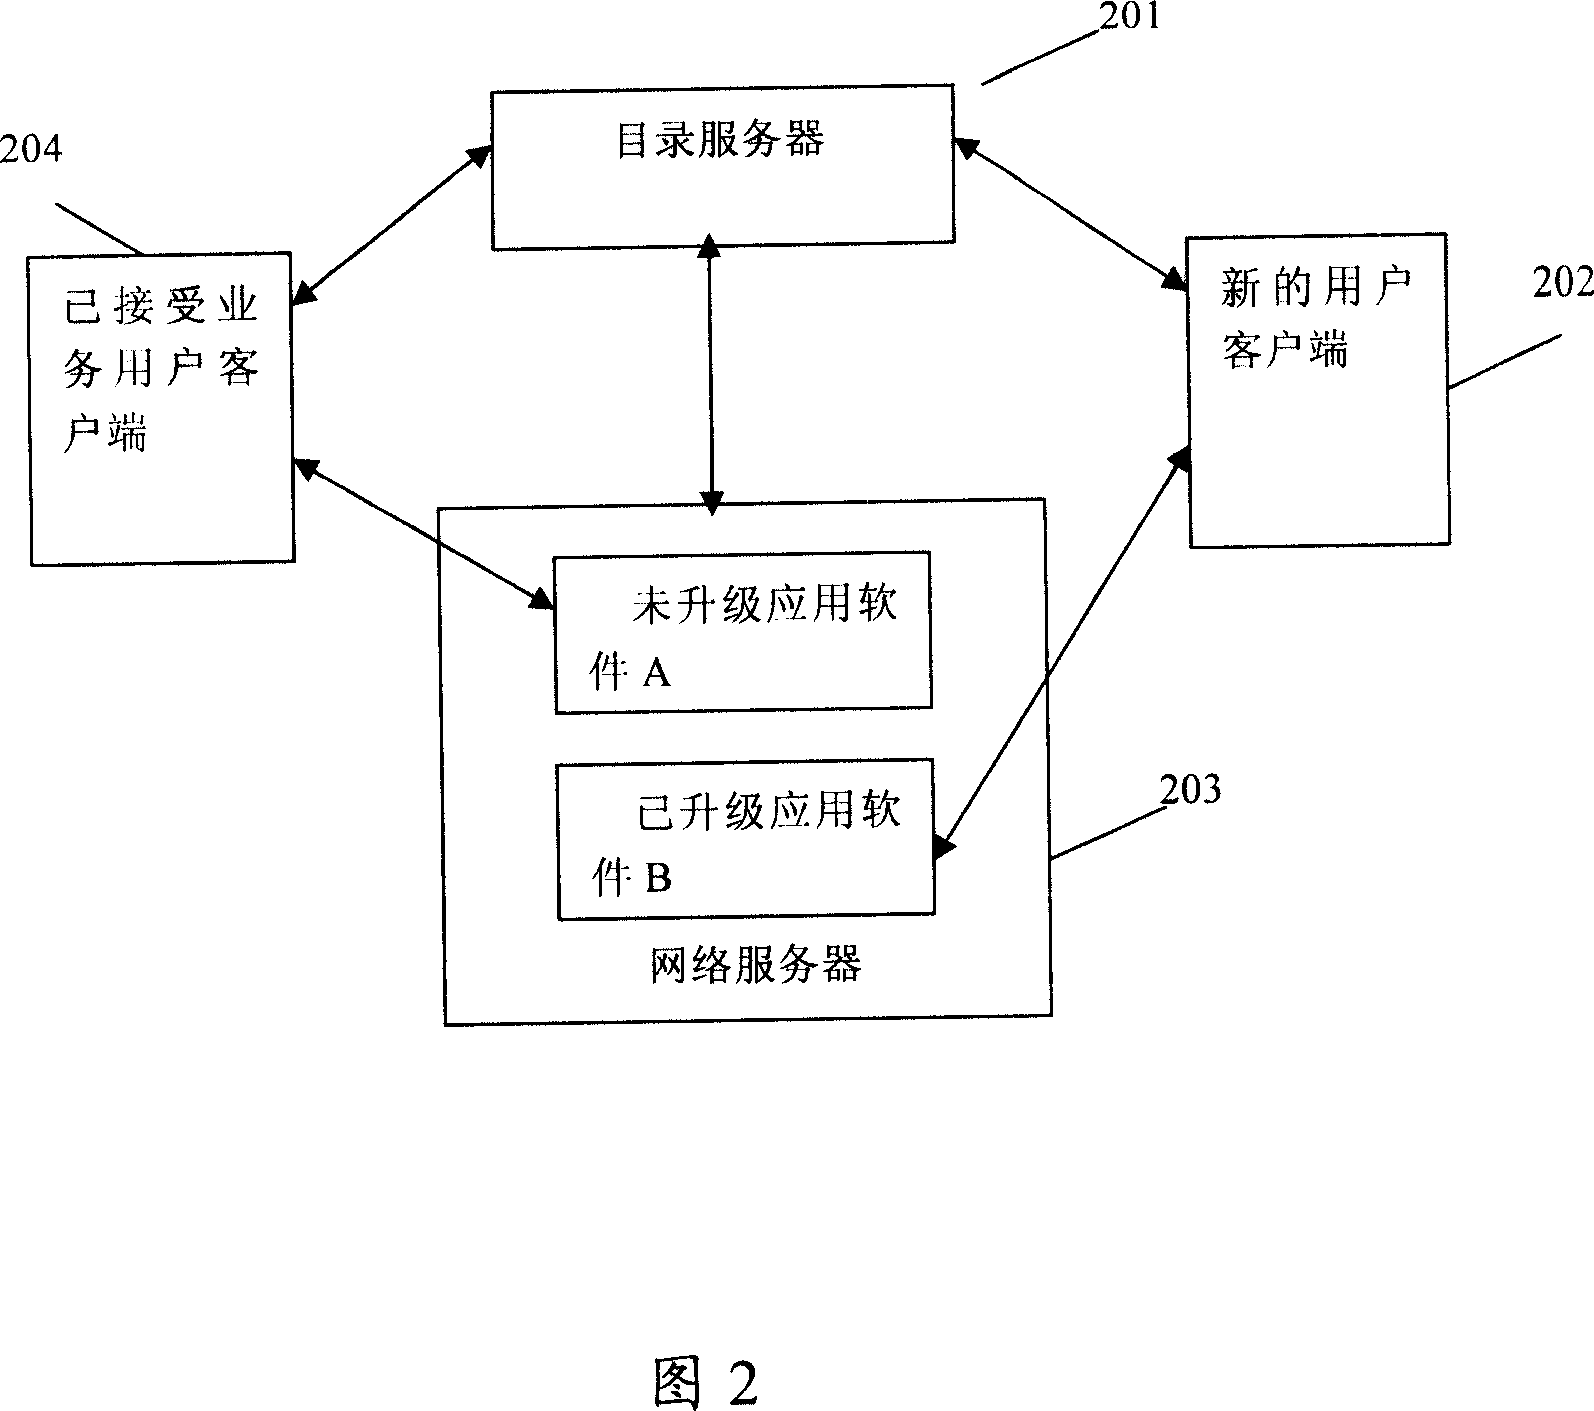 Method for network service in-line upgrading